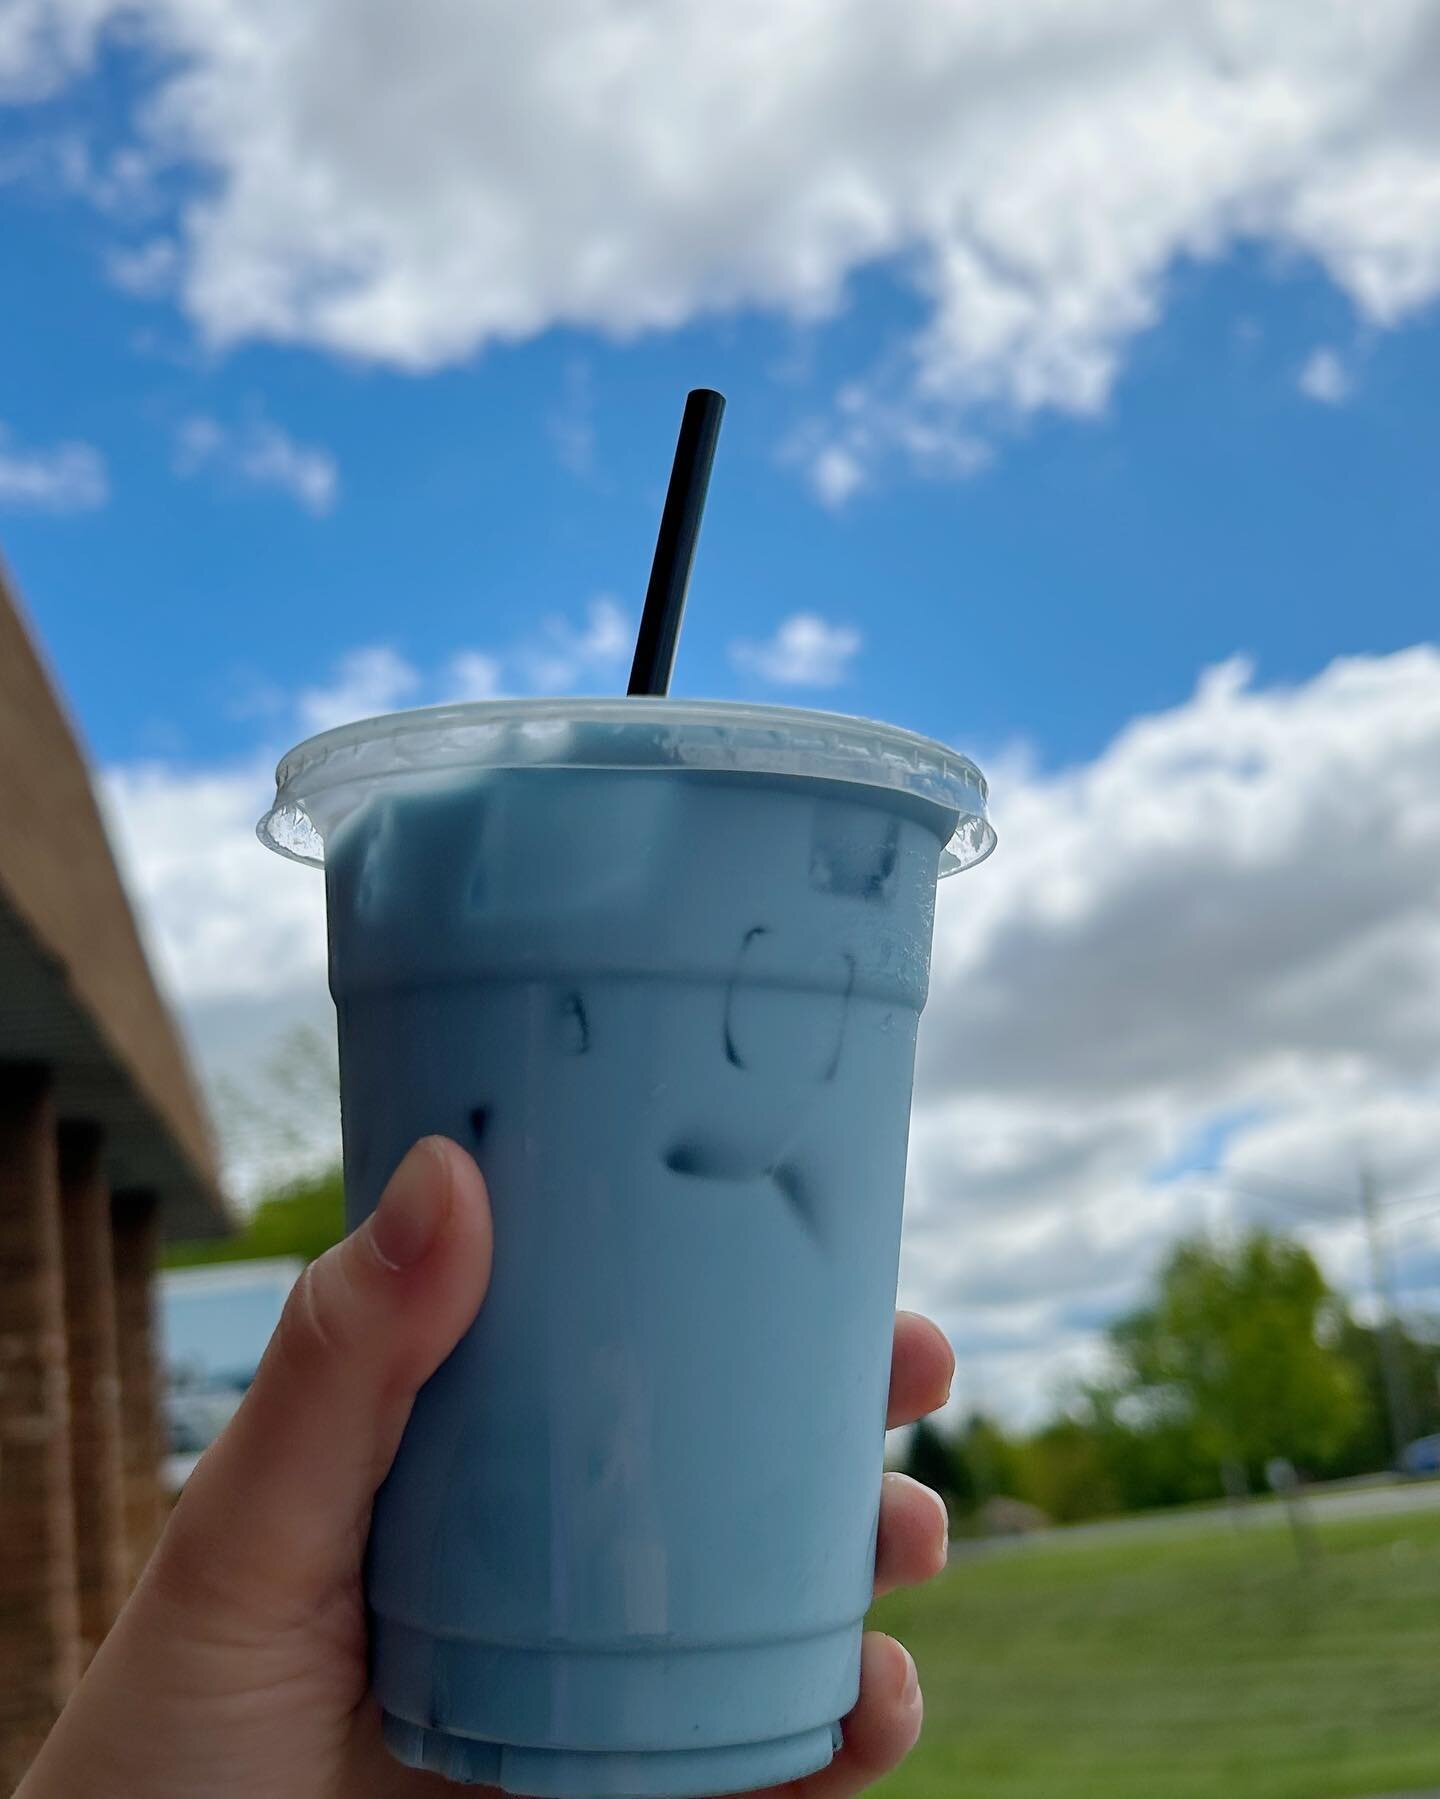 Blue skies call for blue zen🌤️
The blue zen tea latte is a mixture of lemon chamomile tea, butterfly pea powder (aka blue matcha), and in-house made jasmine syrup, and it&rsquo;s topped with milk either steamed or iced. This beverage is one of a kin